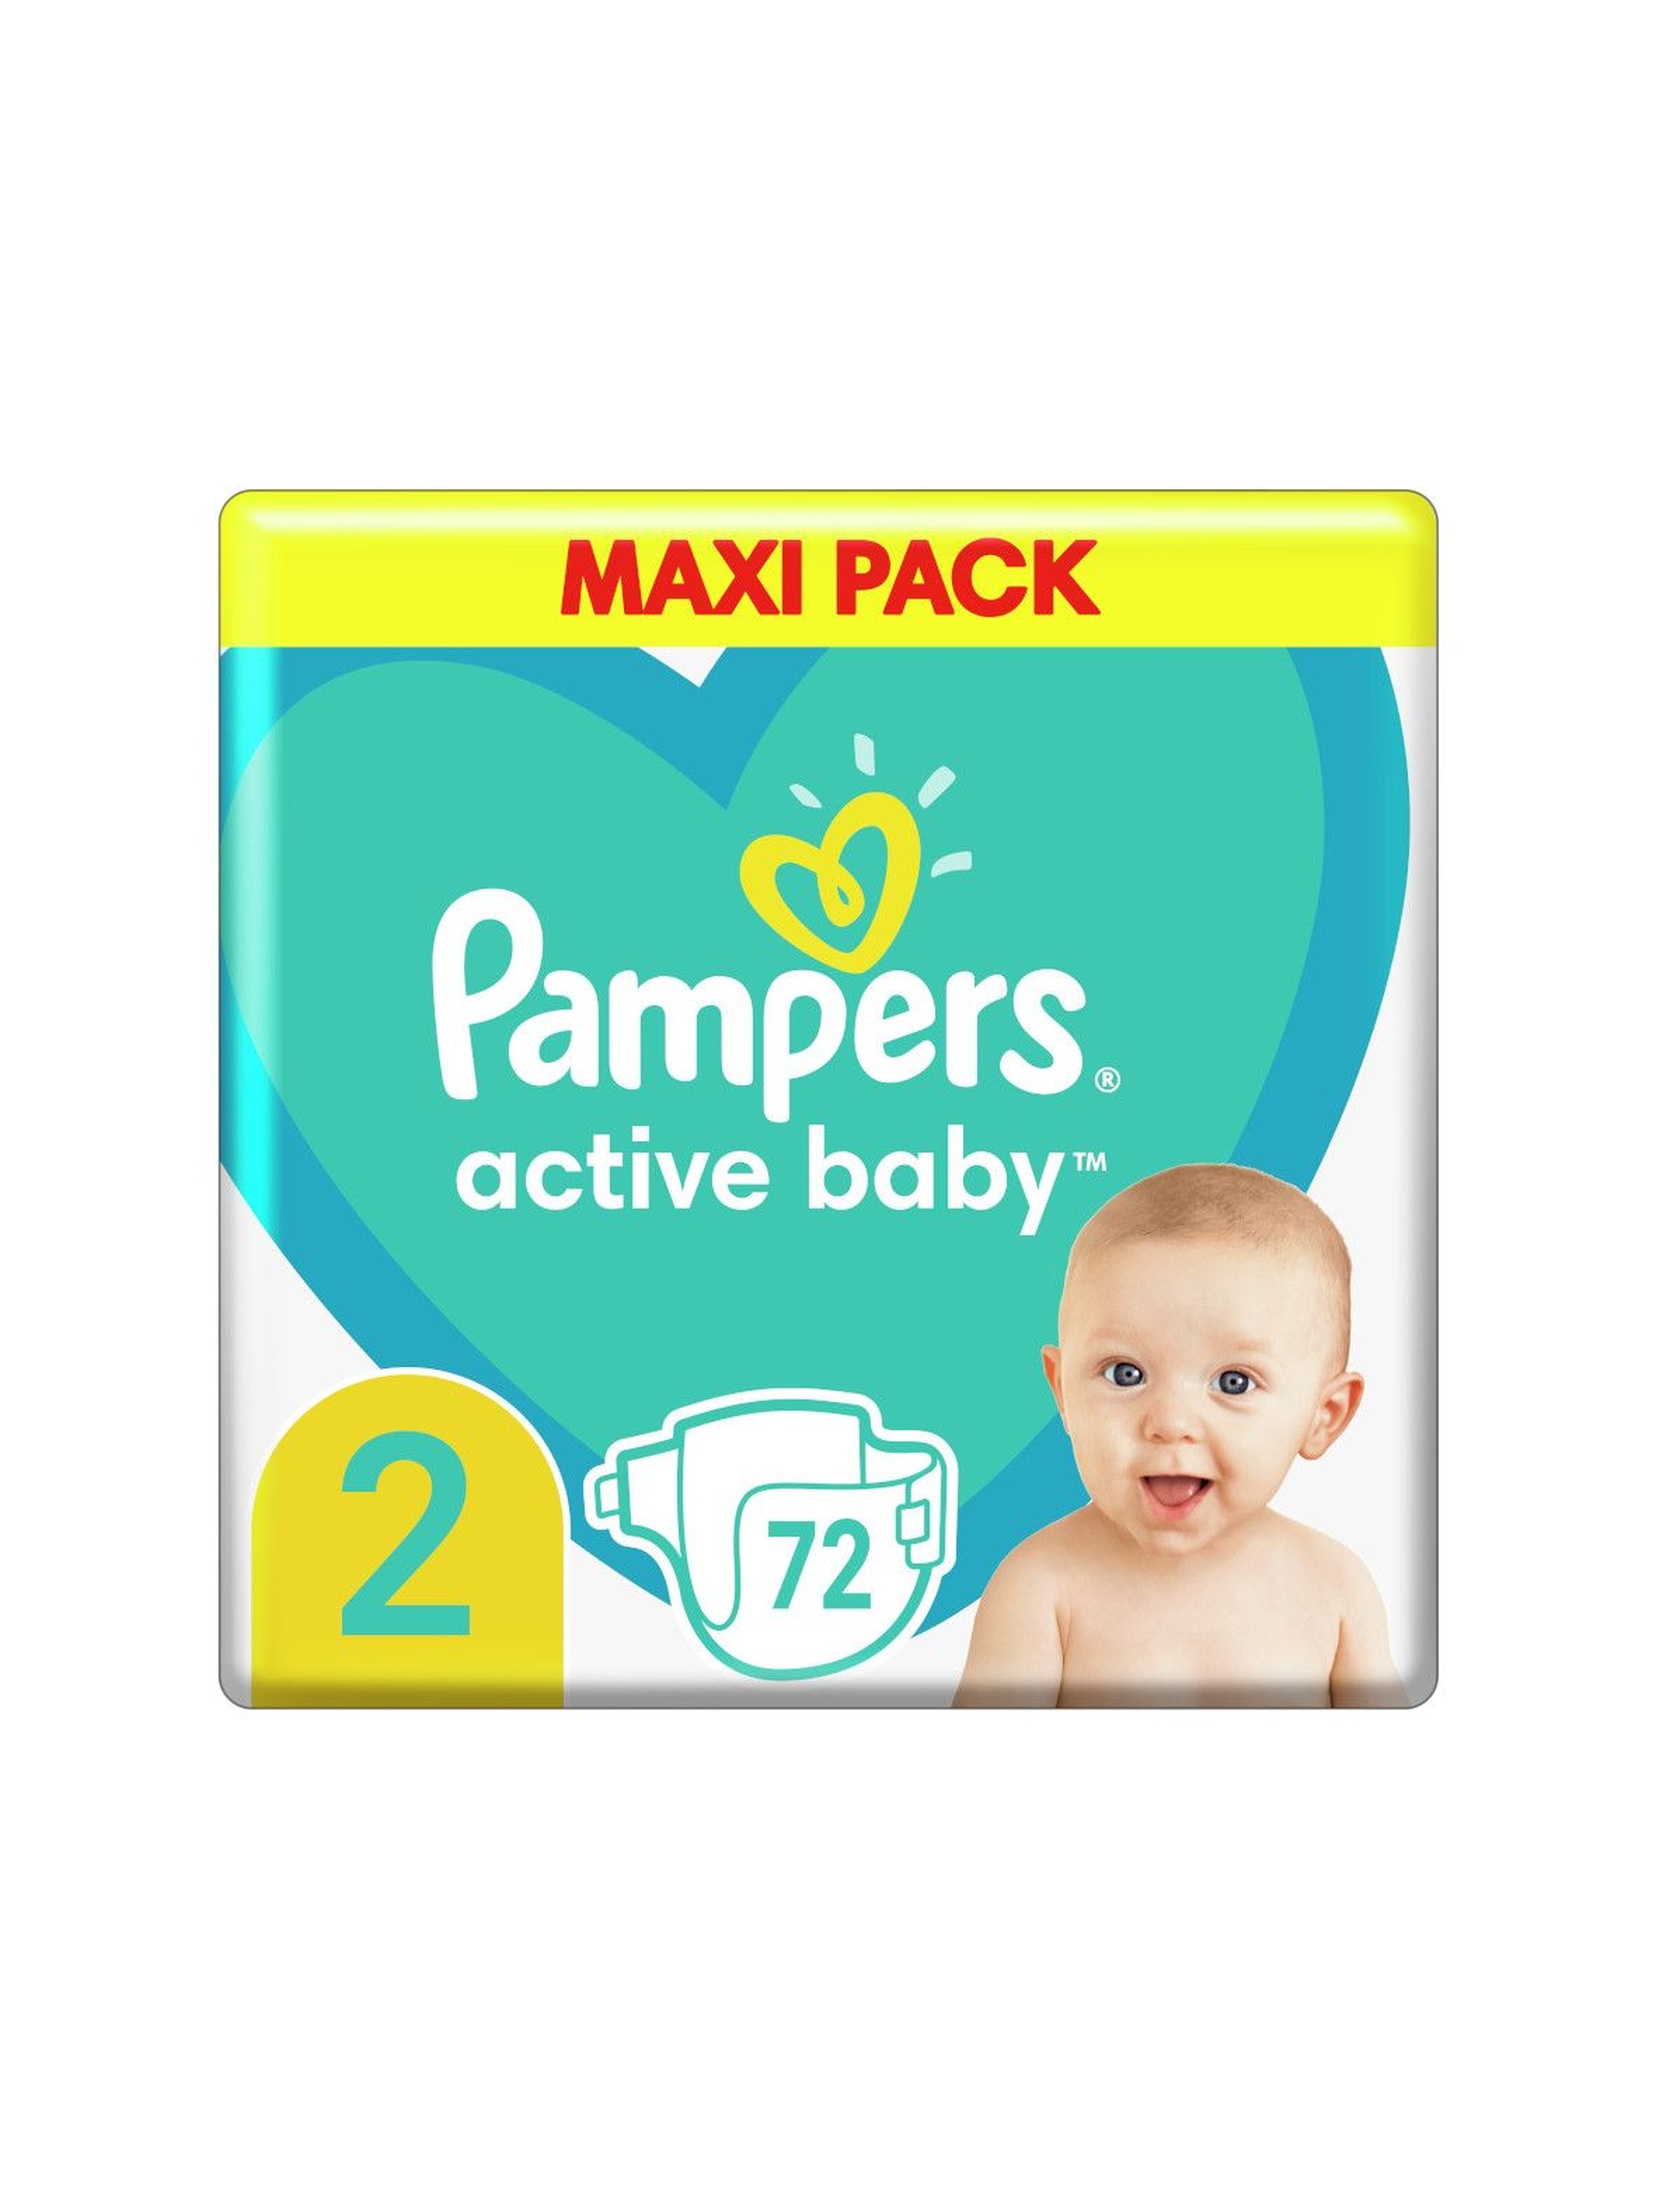 Pampers Active Baby, rozmiar 2, 72szt, 4-8kg